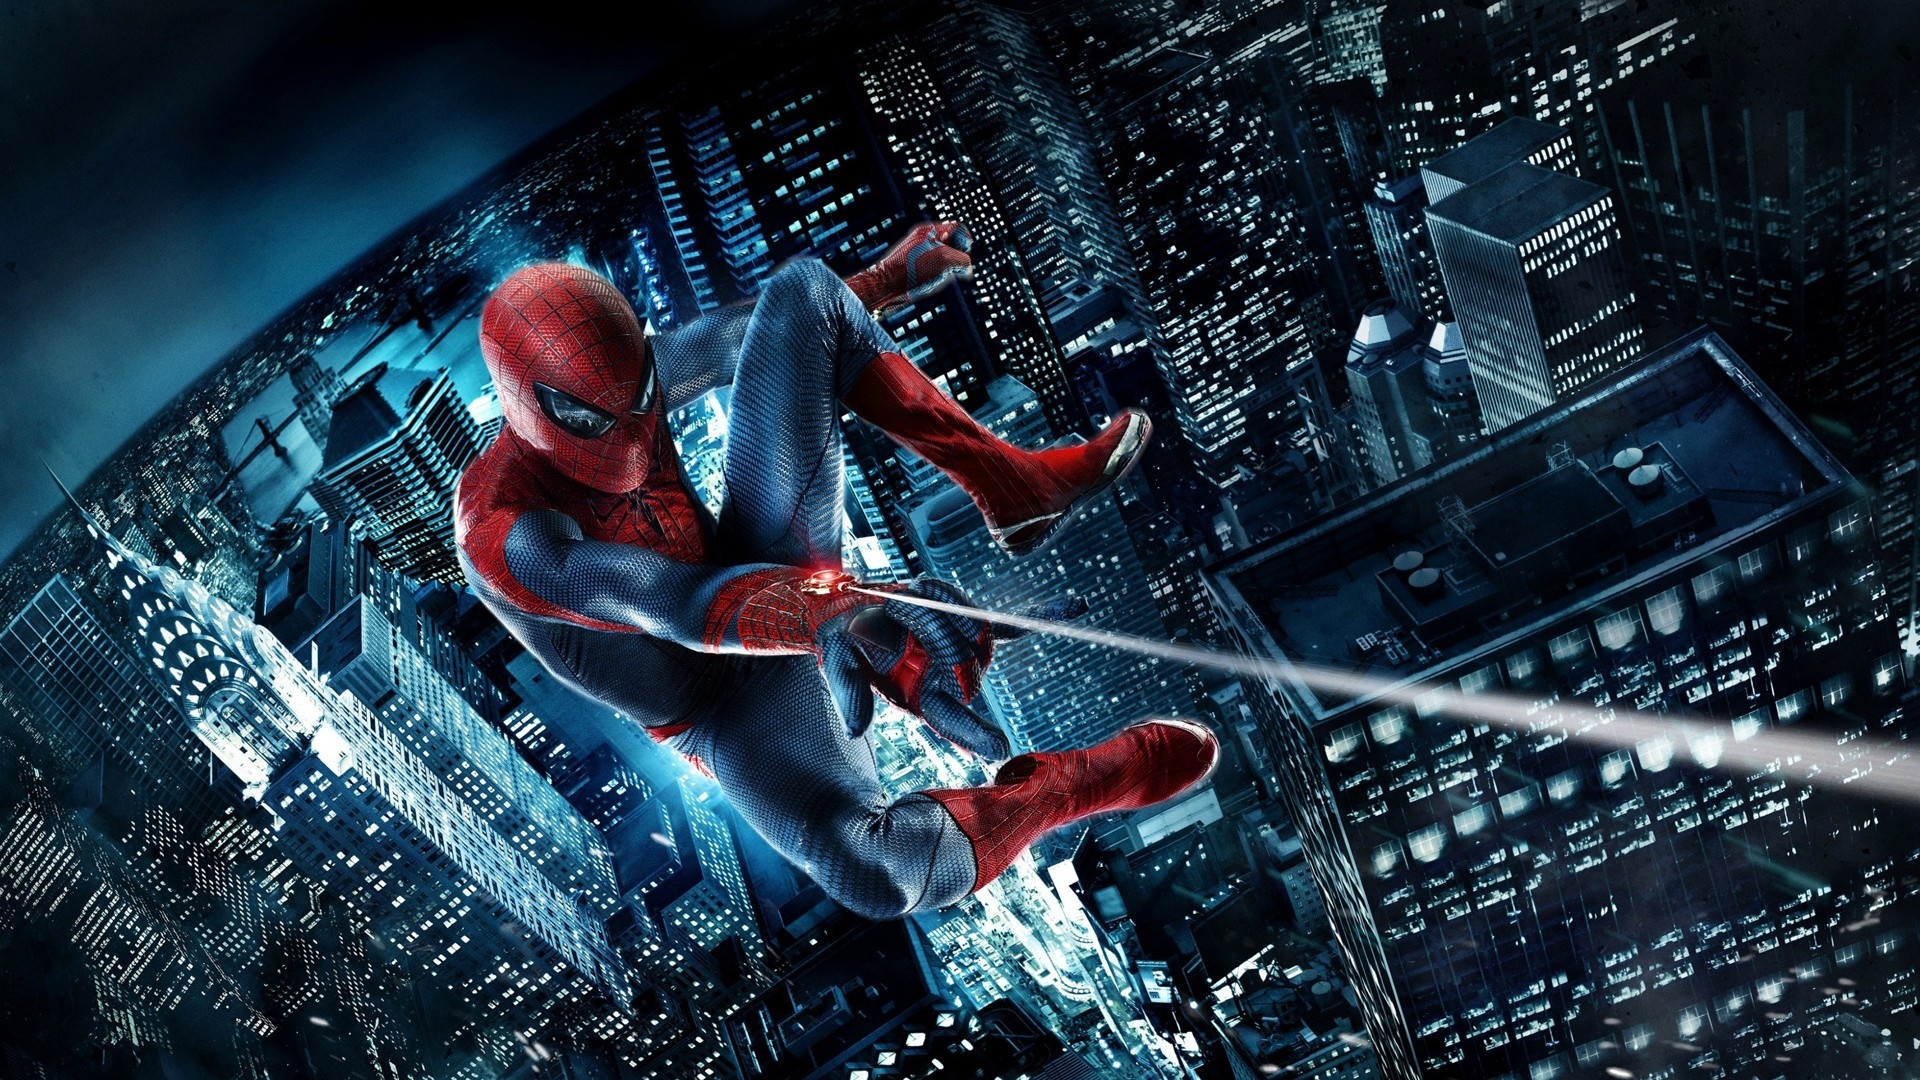 The Amazing SpiderMan 2 for 1920 x 1080 HDTV 1080p resolution